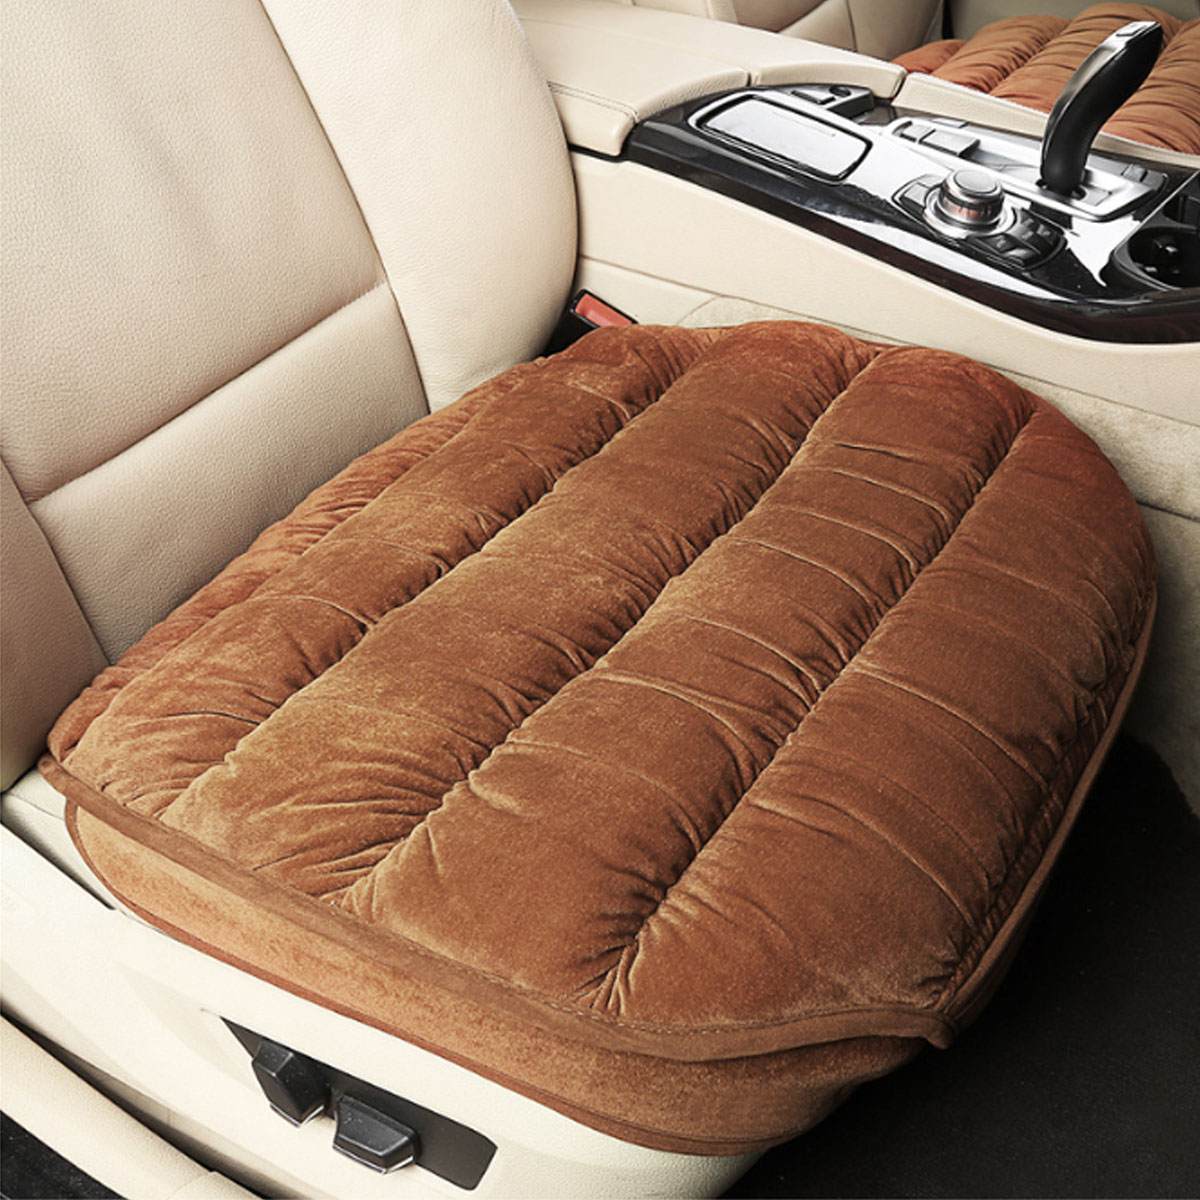 Universal-Car-Front-Seat-Cover-Soft-Plush-Breathable-Pads-Winter-Chair-Cushion-1628307-5